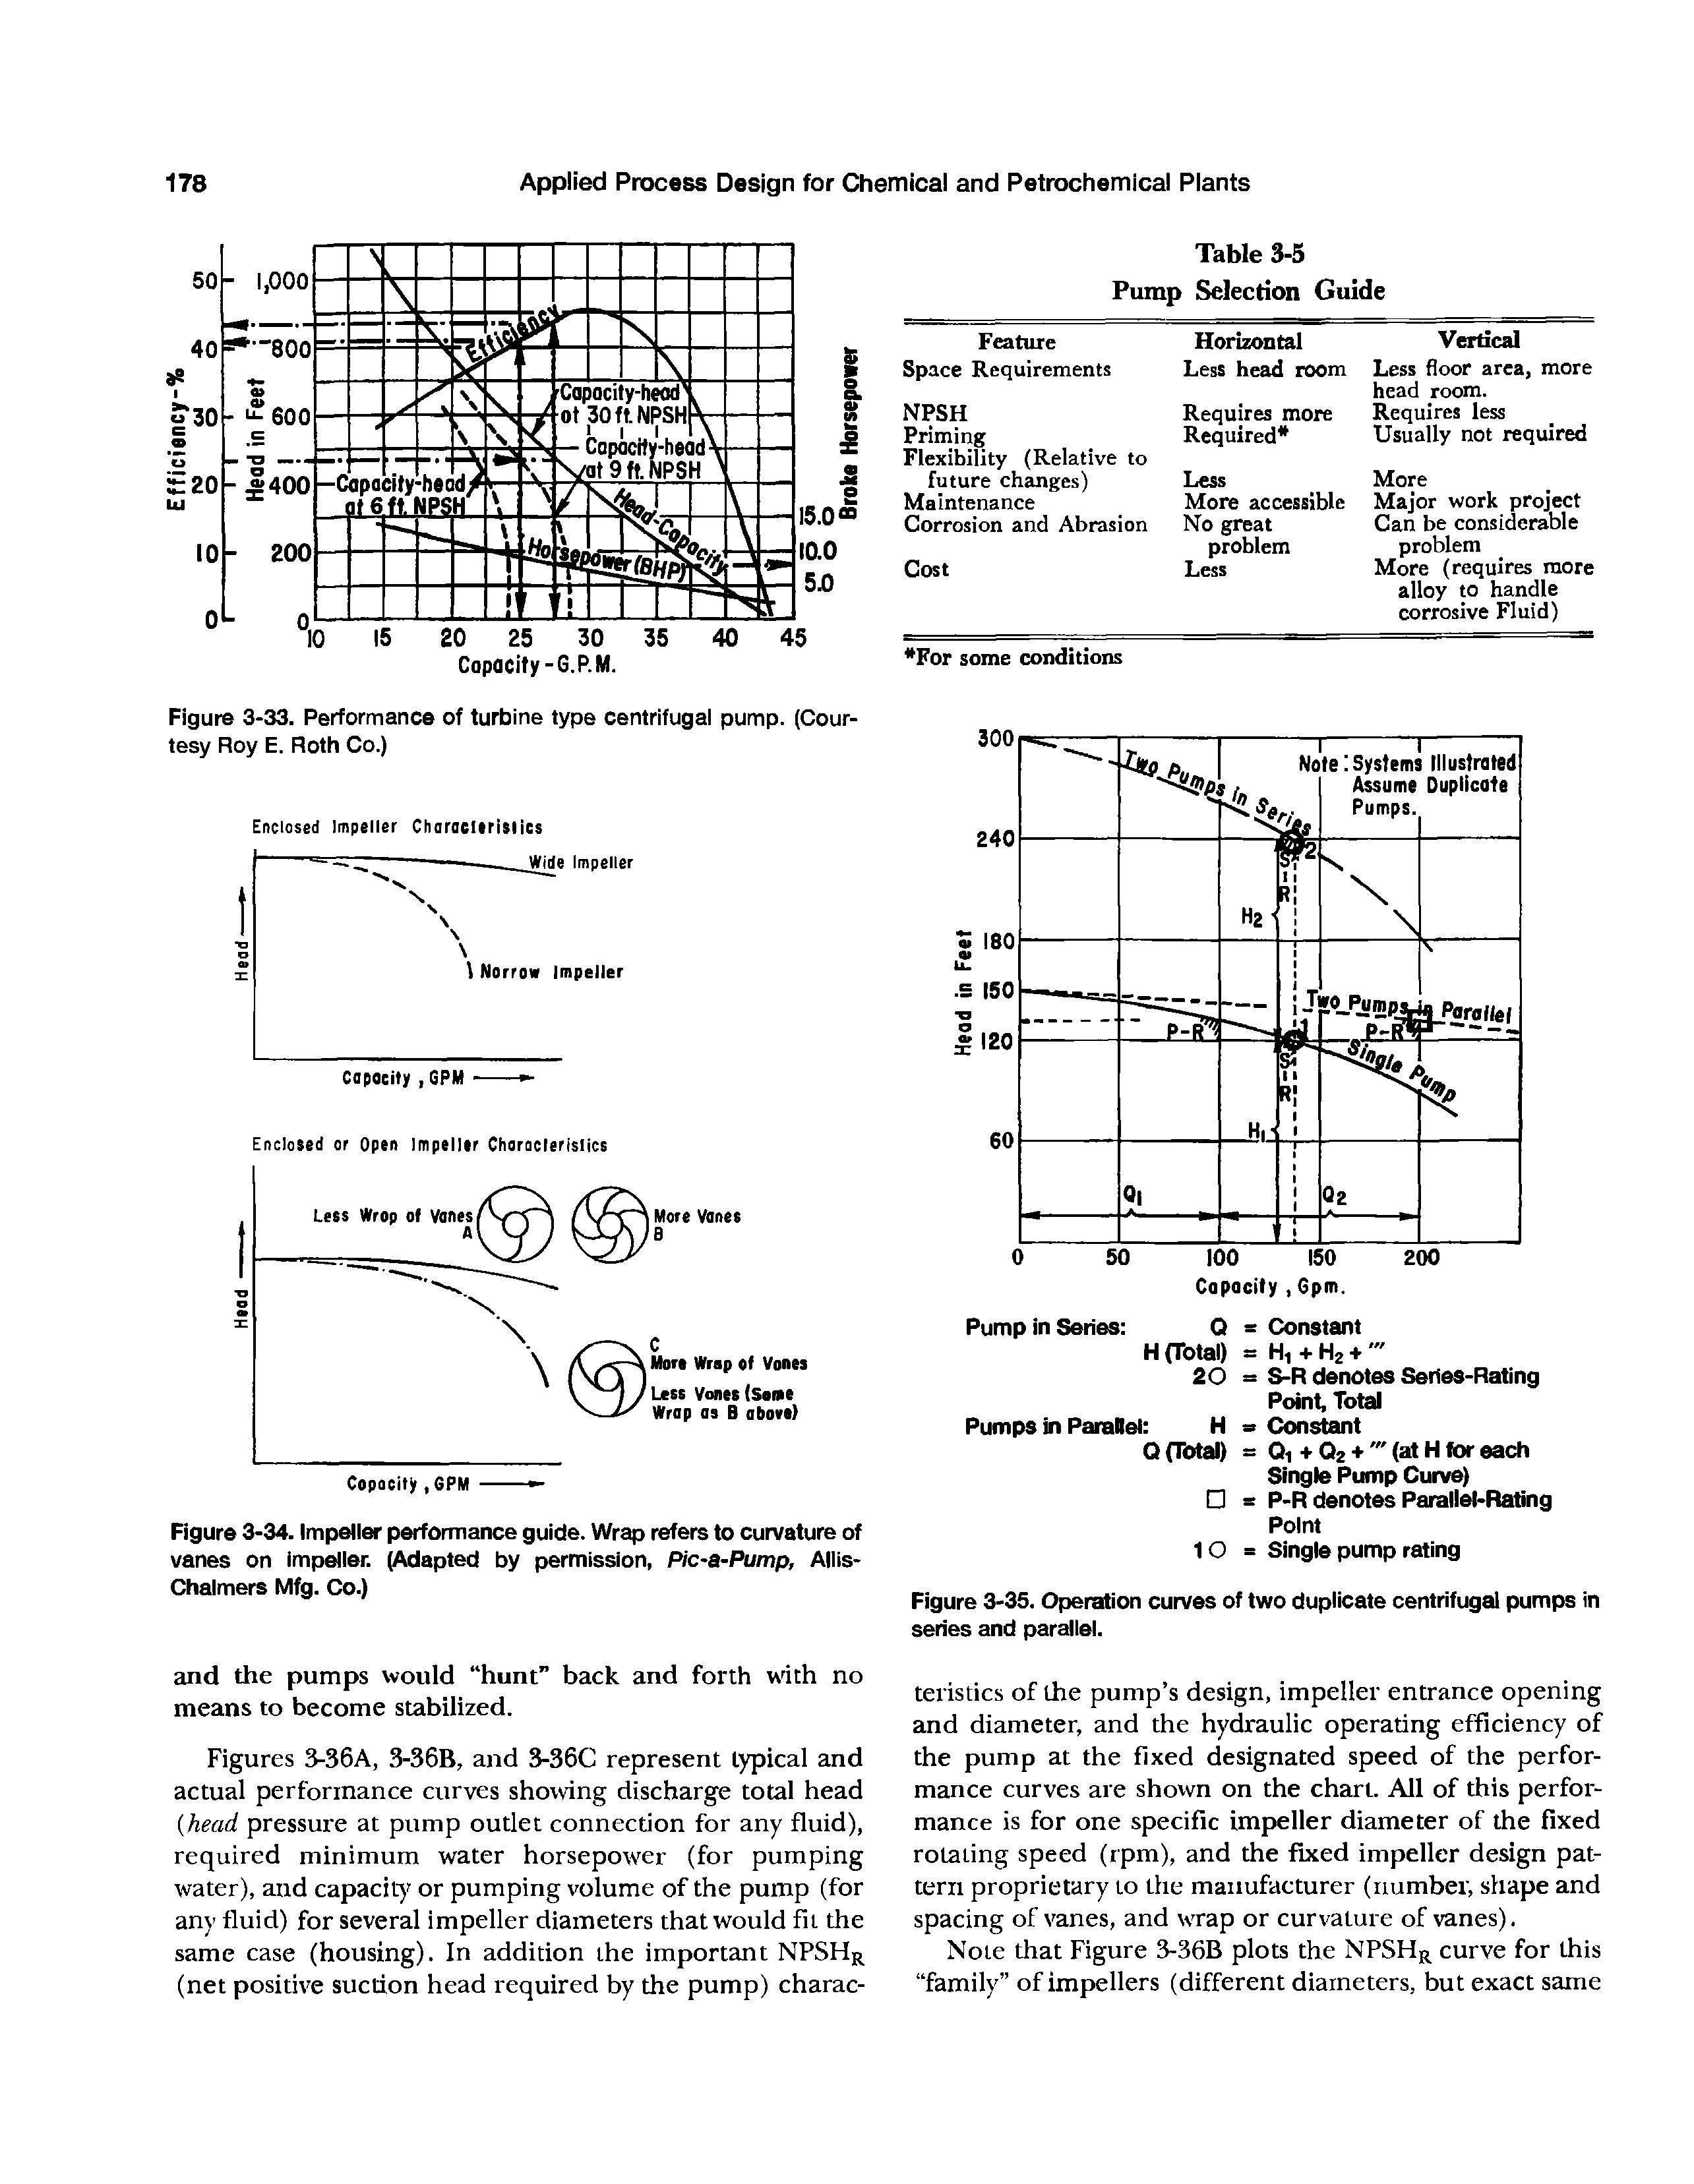 Figures 3-36A, 3-36B, and 3-36C represent typical and actual performance curves showing discharge total head head pressure at pump outlet connection for any fluid), required minimum water horsepower (for pumping water), and capacity or pumping volume of the pump (for any fluid) for several impeller diameters that would fit the same case (housing). In addition the important NPSHR (net positive suction head required by the pump) charac-...